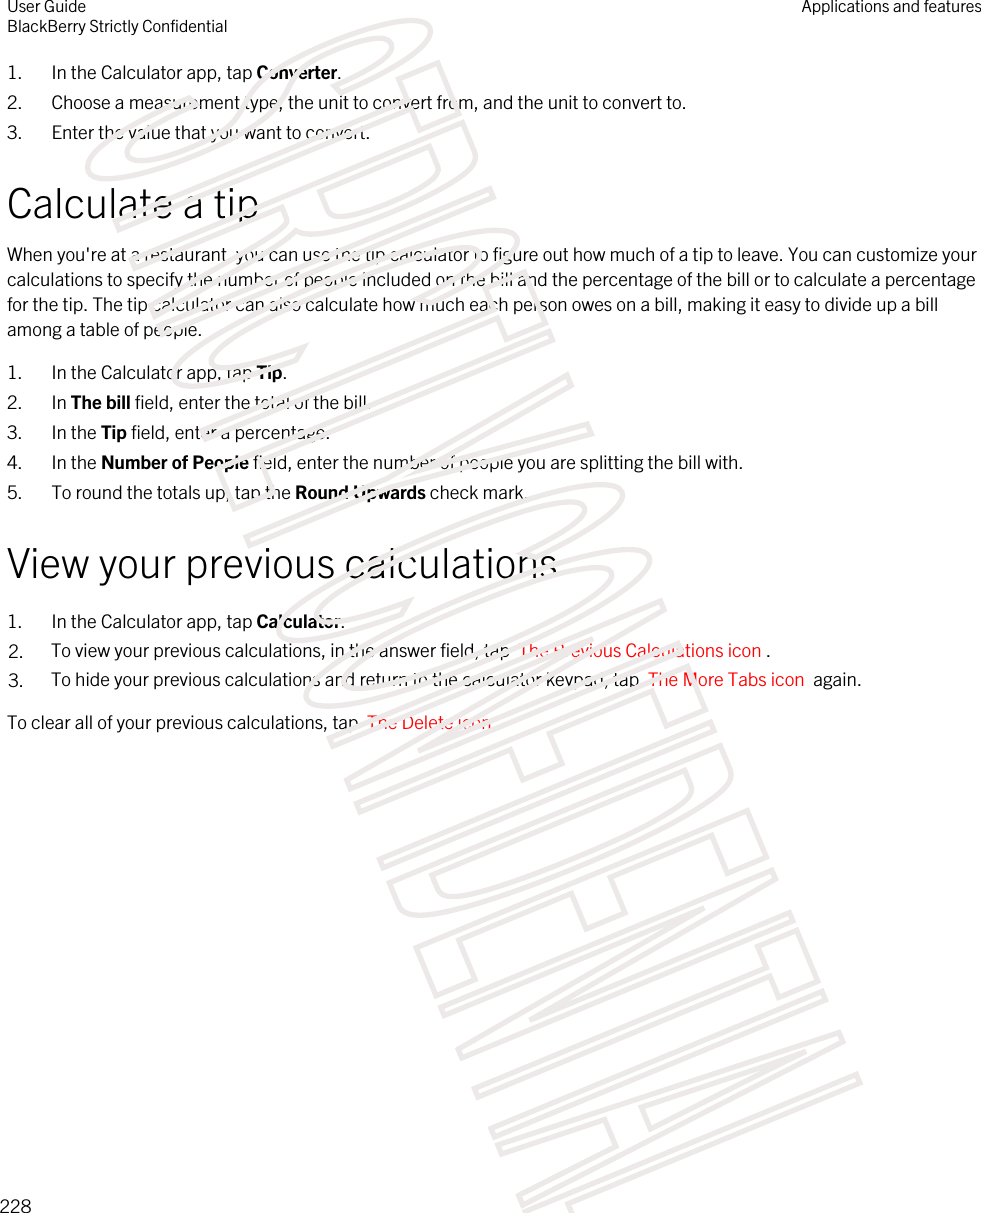 1. In the Calculator app, tap Converter.2. Choose a measurement type, the unit to convert from, and the unit to convert to.3. Enter the value that you want to convert.Calculate a tipWhen you&apos;re at a restaurant, you can use the tip calculator to figure out how much of a tip to leave. You can customize your calculations to specify the number of people included on the bill and the percentage of the bill or to calculate a percentage for the tip. The tip calculator can also calculate how much each person owes on a bill, making it easy to divide up a bill among a table of people.1. In the Calculator app, tap Tip.2. In The bill field, enter the total of the bill.3. In the Tip field, enter a percentage.4. In the Number of People field, enter the number of people you are splitting the bill with.5. To round the totals up, tap the Round Upwards check mark.View your previous calculations1. In the Calculator app, tap Calculator.2. To view your previous calculations, in the answer field, tap  The Previous Calculations icon .3. To hide your previous calculations and return to the calculator keypad, tap  The More Tabs icon  again.To clear all of your previous calculations, tap  The Delete icon .User GuideBlackBerry Strictly Confidential Applications and features228STRICTLY CONFIDENTIAL